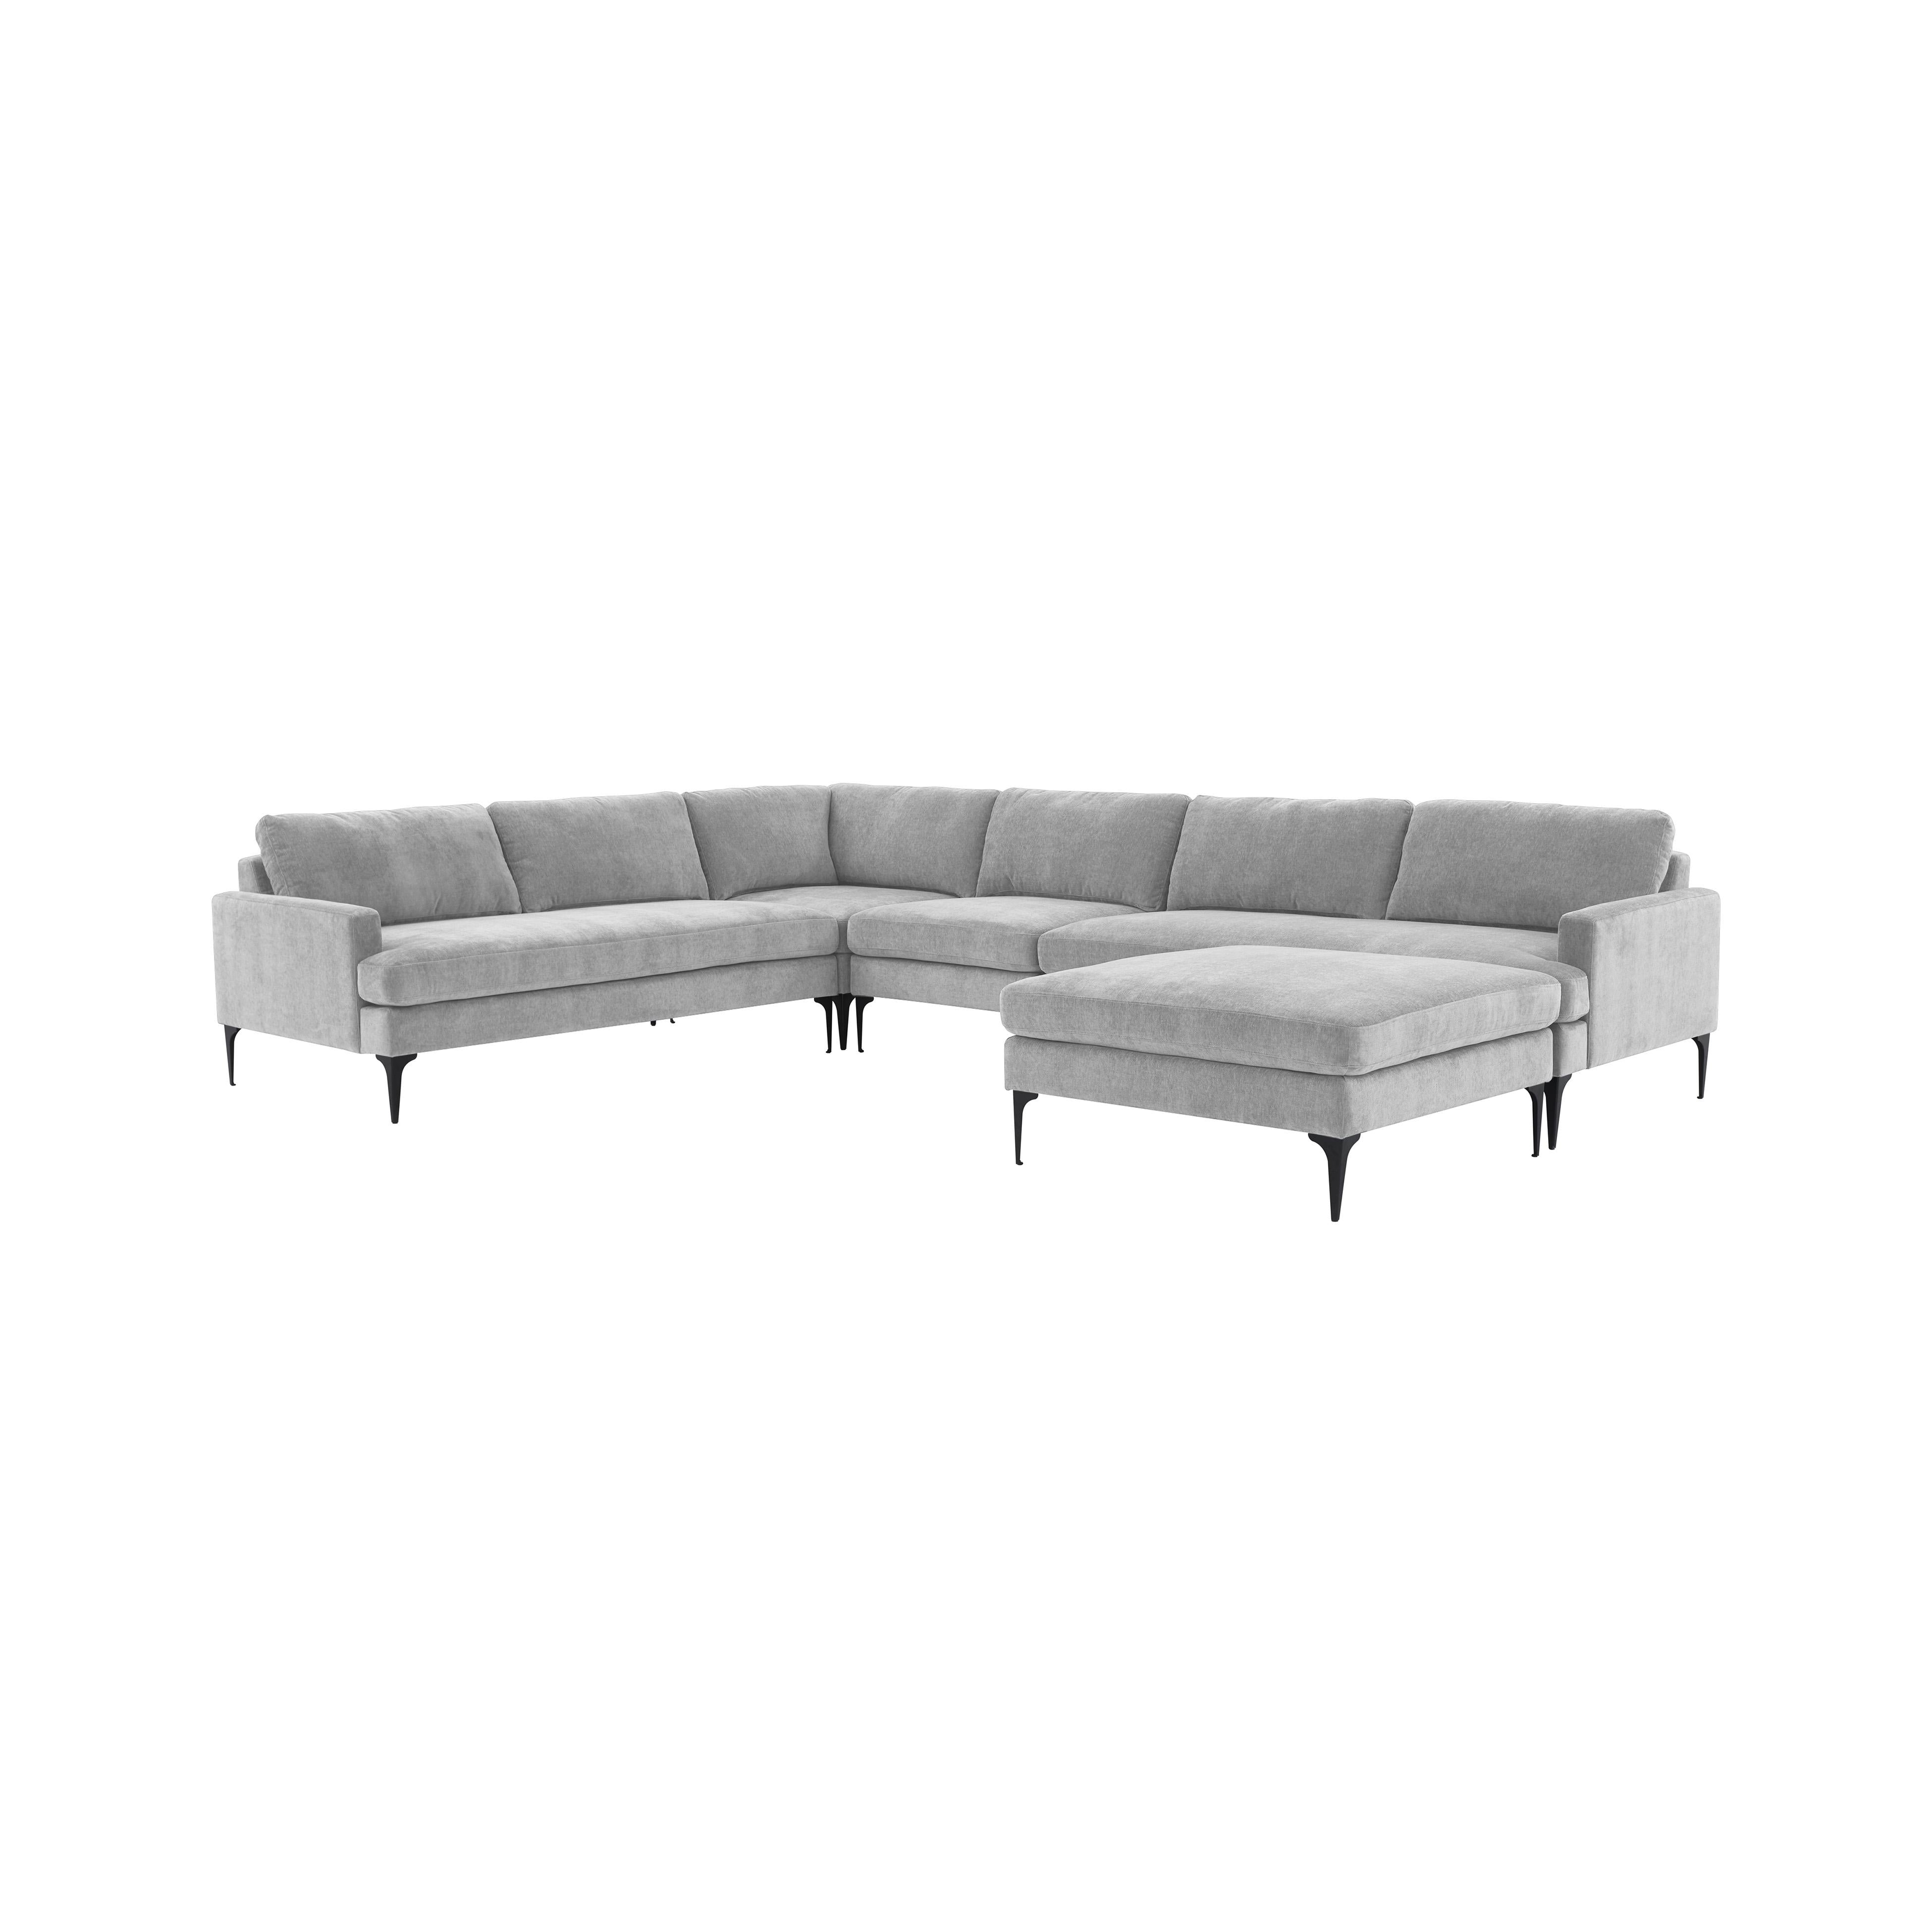 Tov Furniture Sectionals - Serena Gray Velvet Large Chaise Sectional with Black Legs